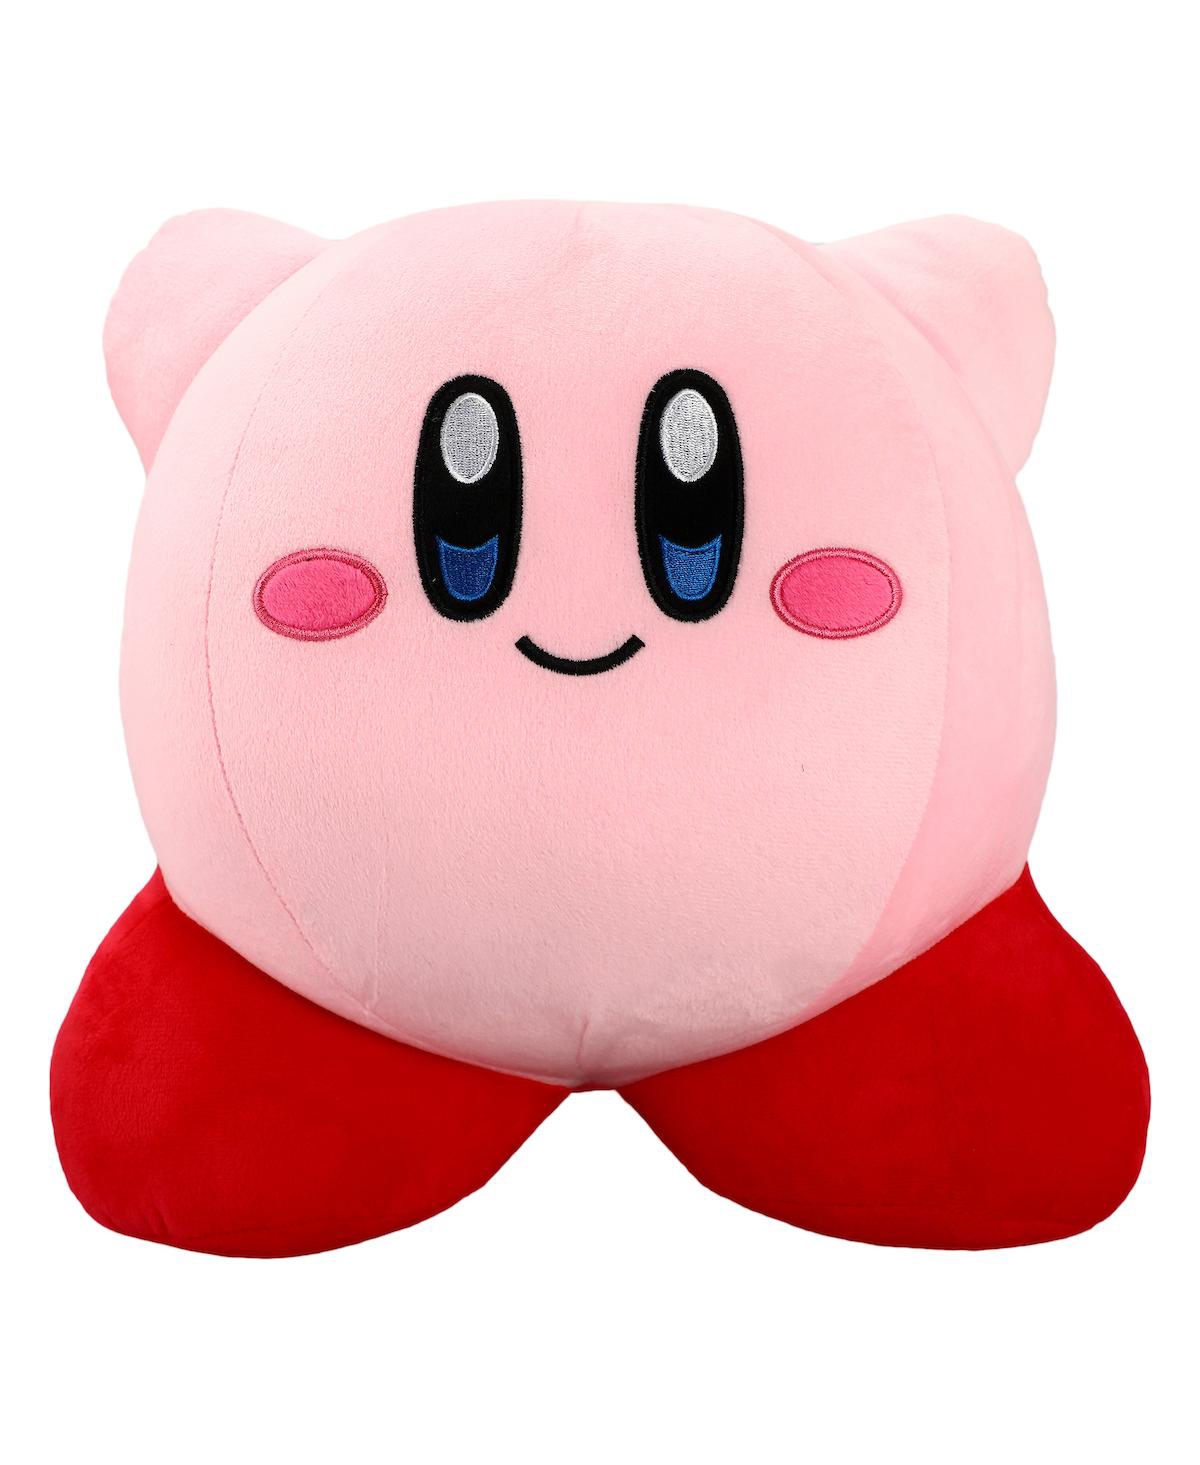 The Pink Puff Plush Mini Backpack - Pink